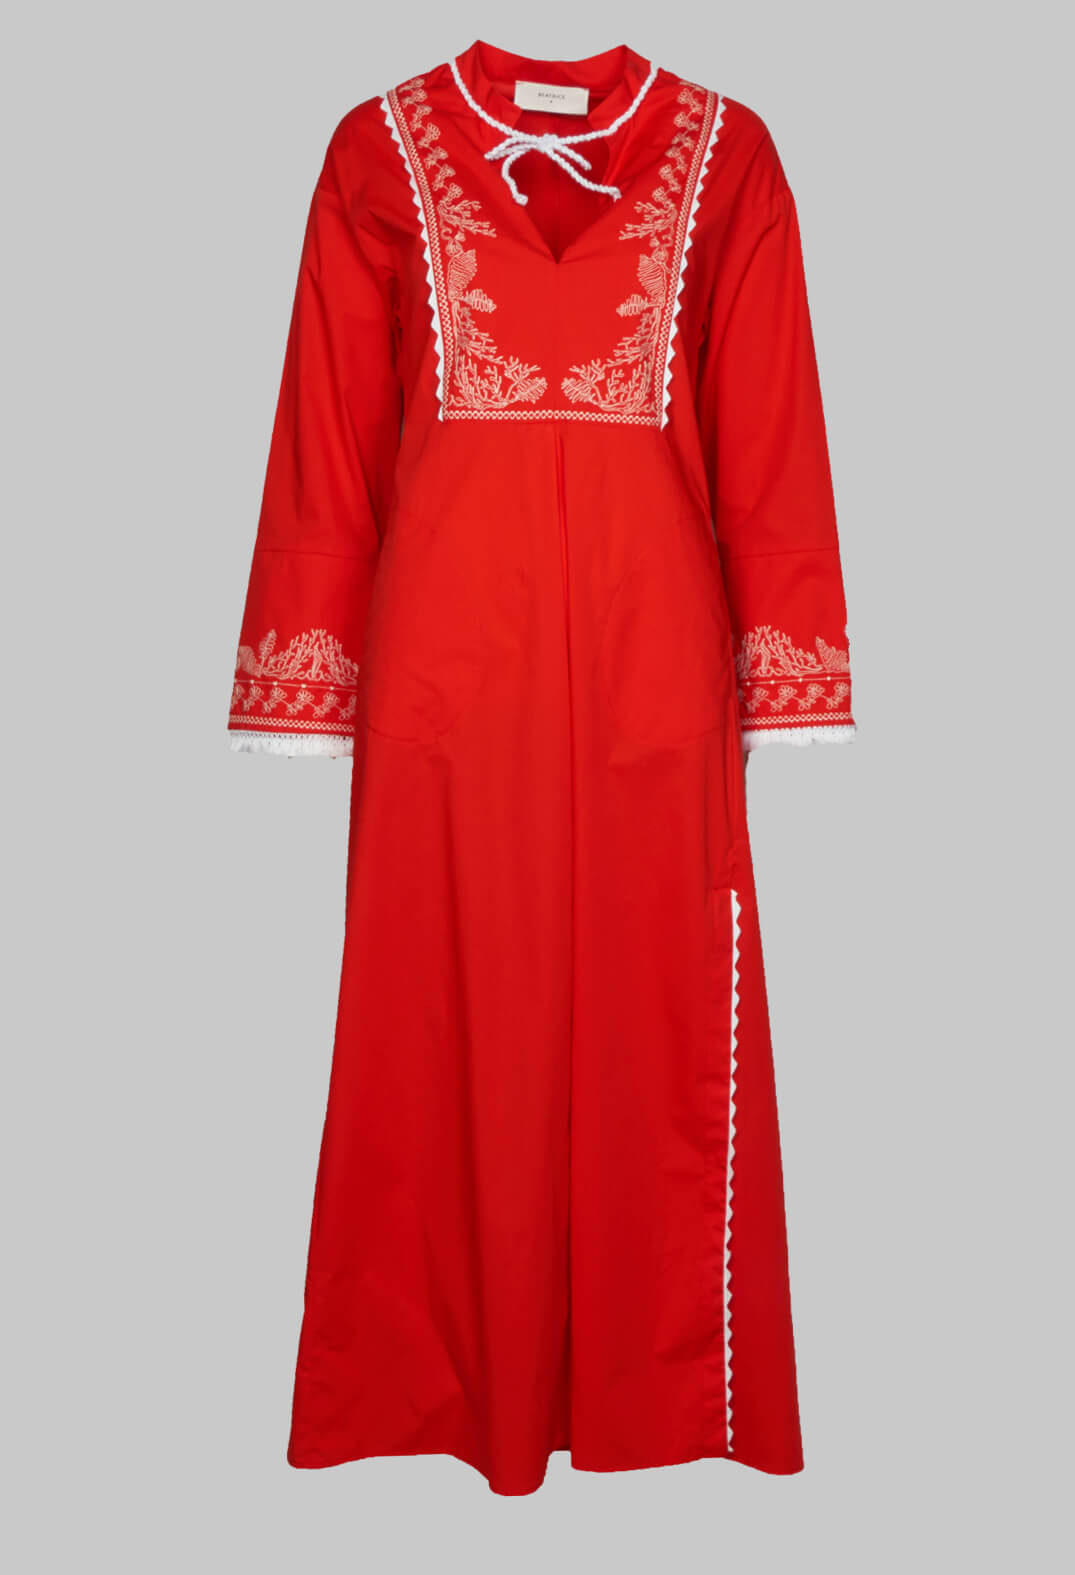 red dress with long sleeves and embroidery